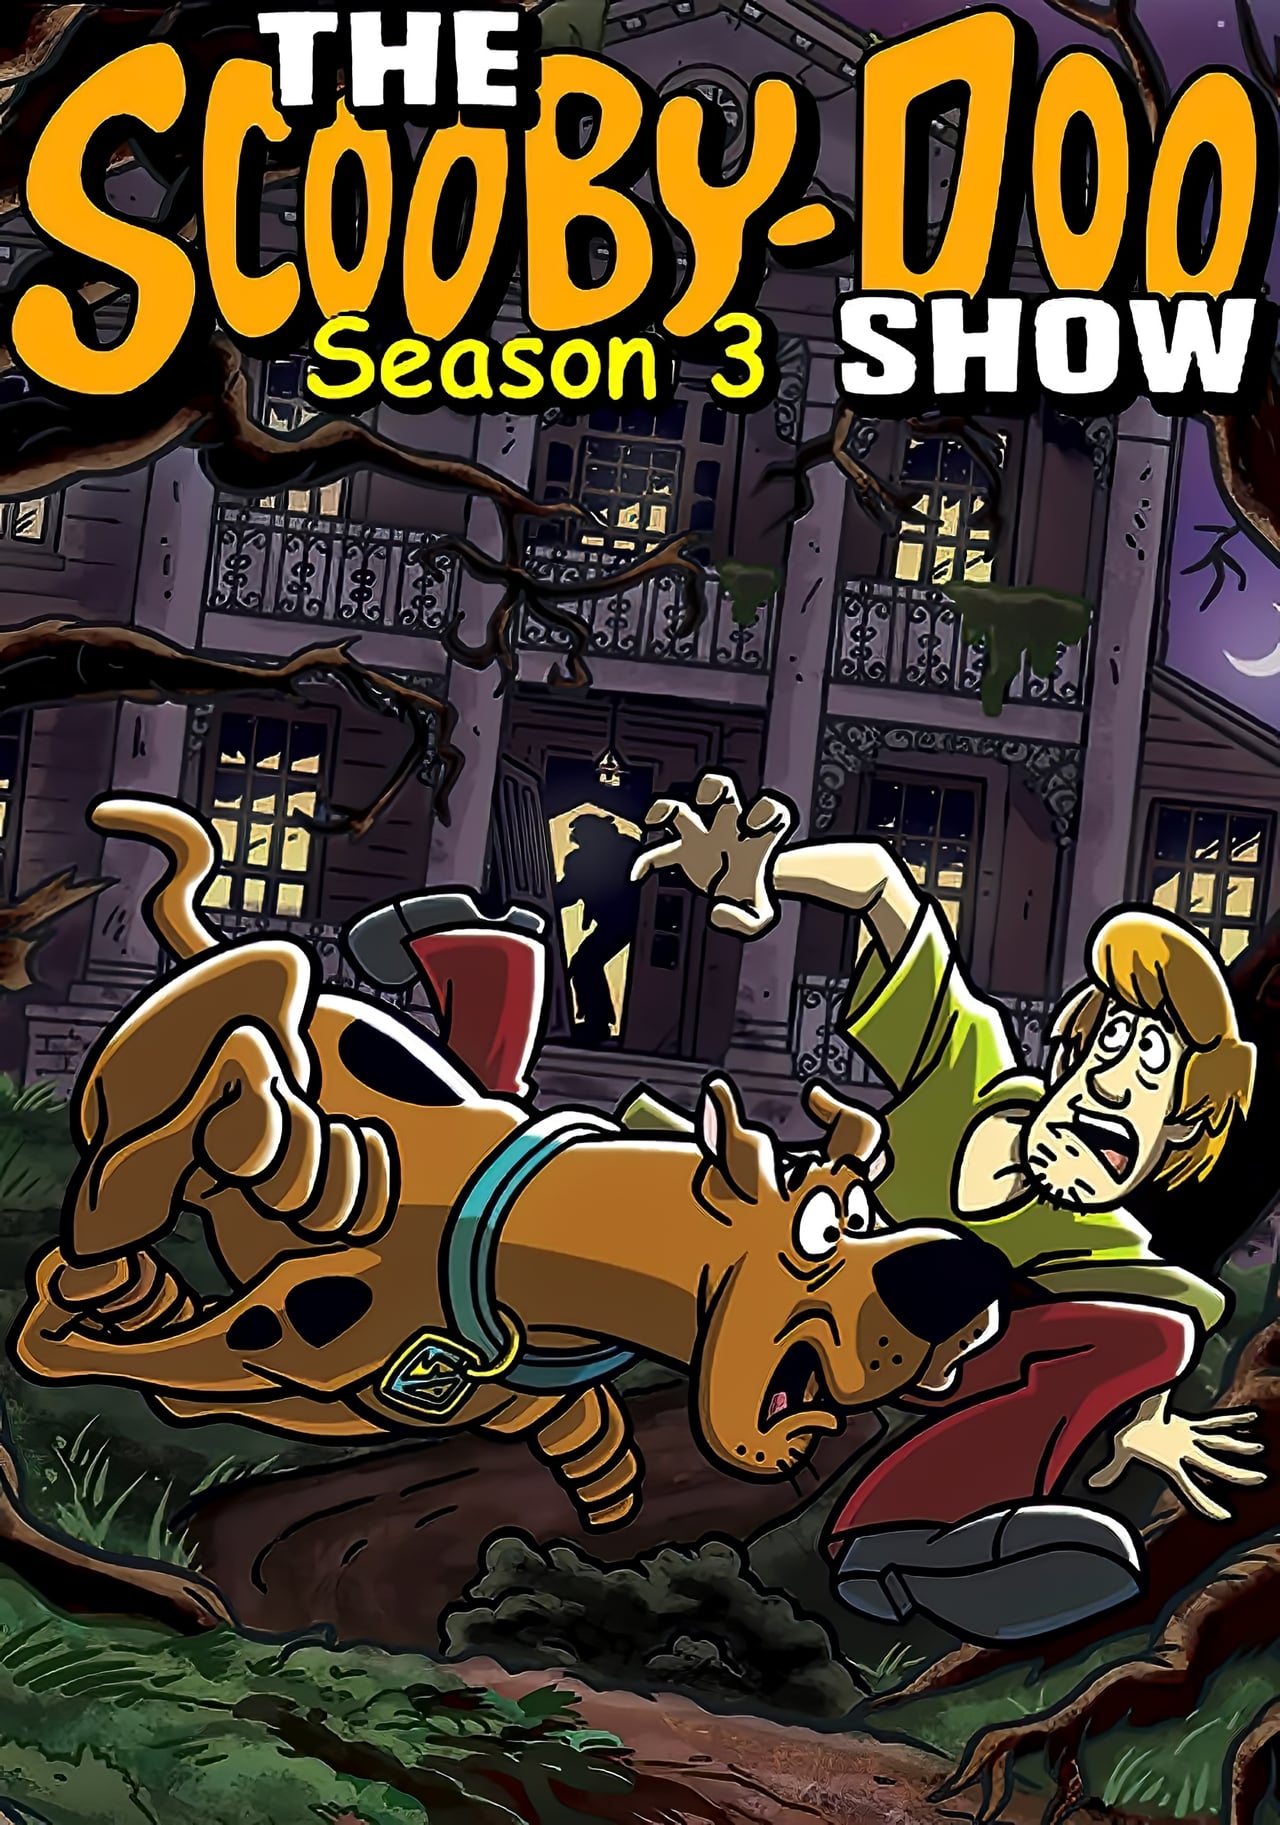 The Scooby  Doo  Show Season 1  wiki synopsis reviews 